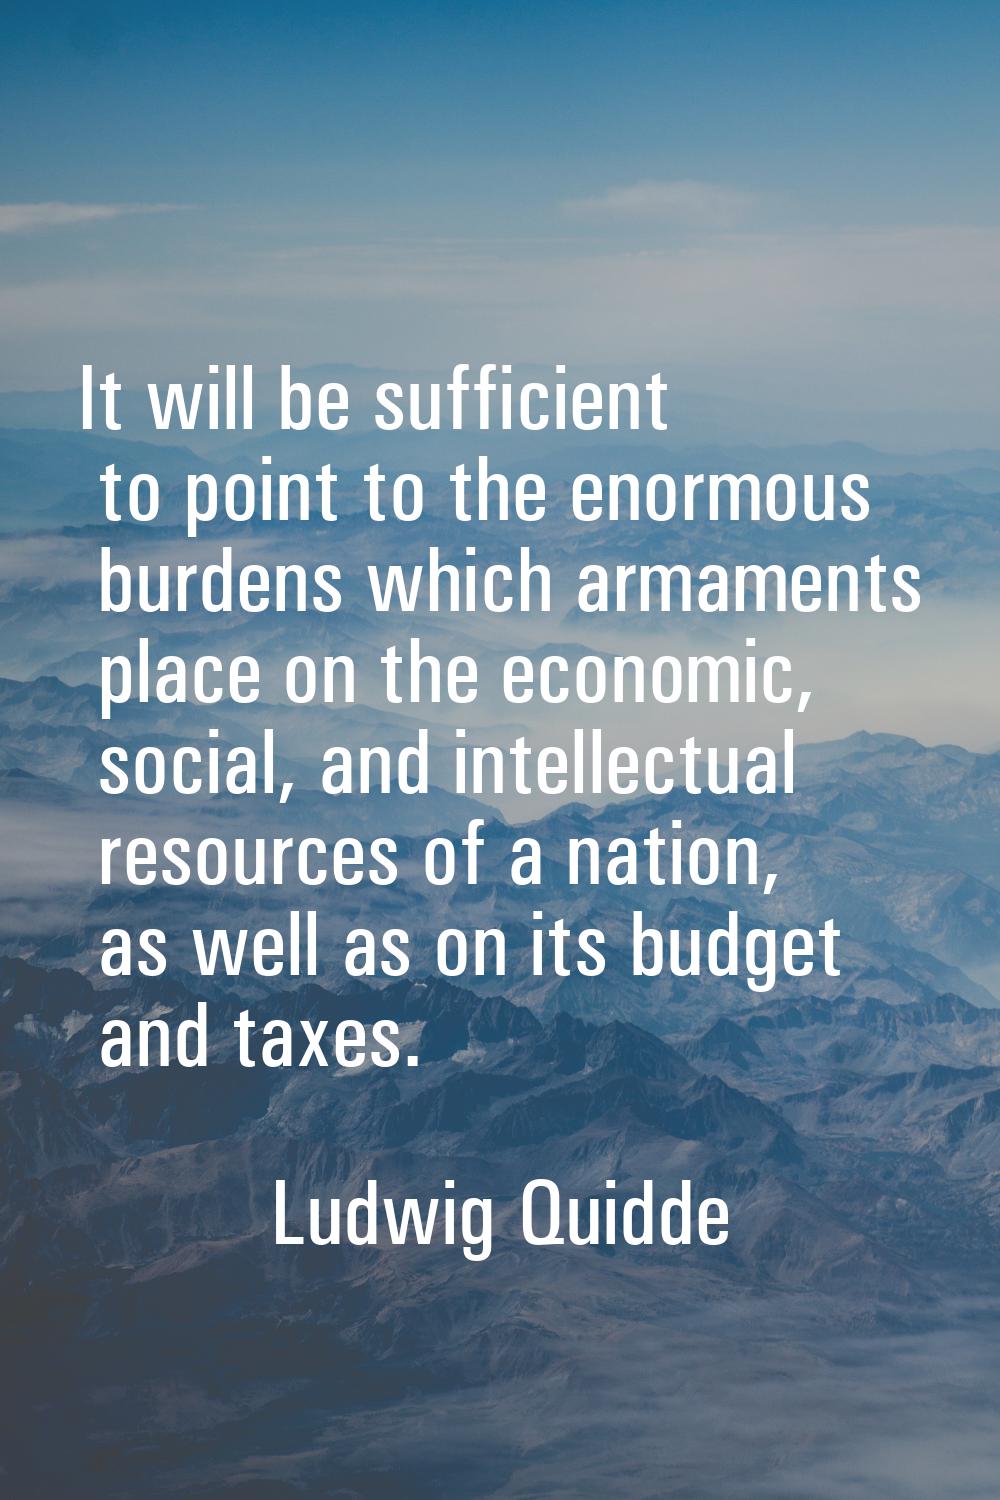 It will be sufficient to point to the enormous burdens which armaments place on the economic, socia